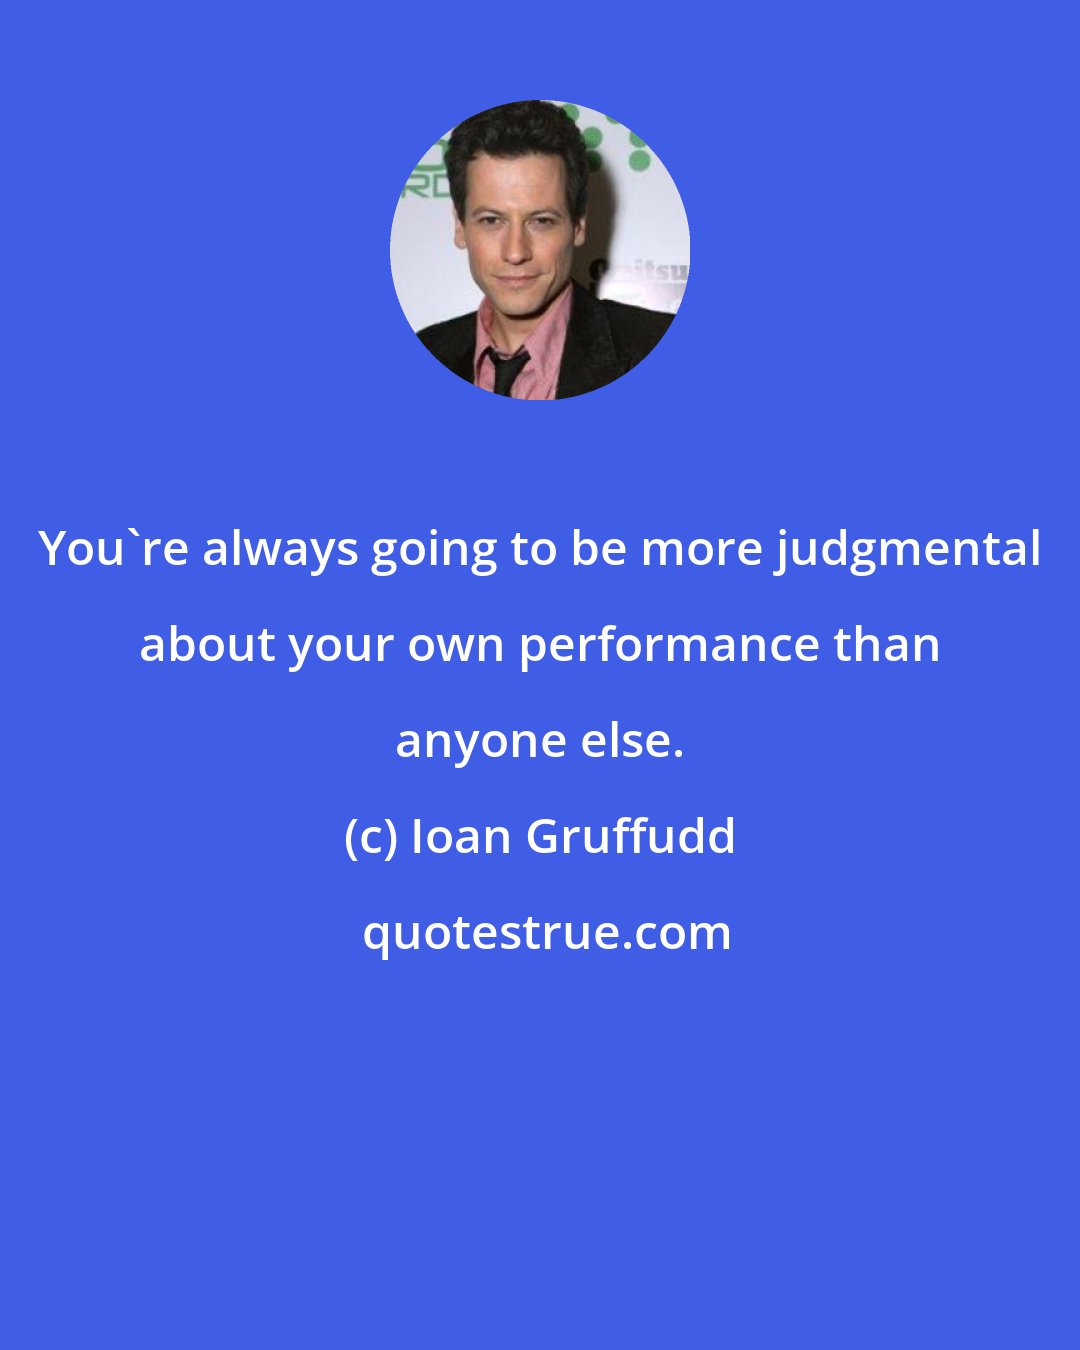 Ioan Gruffudd: You're always going to be more judgmental about your own performance than anyone else.